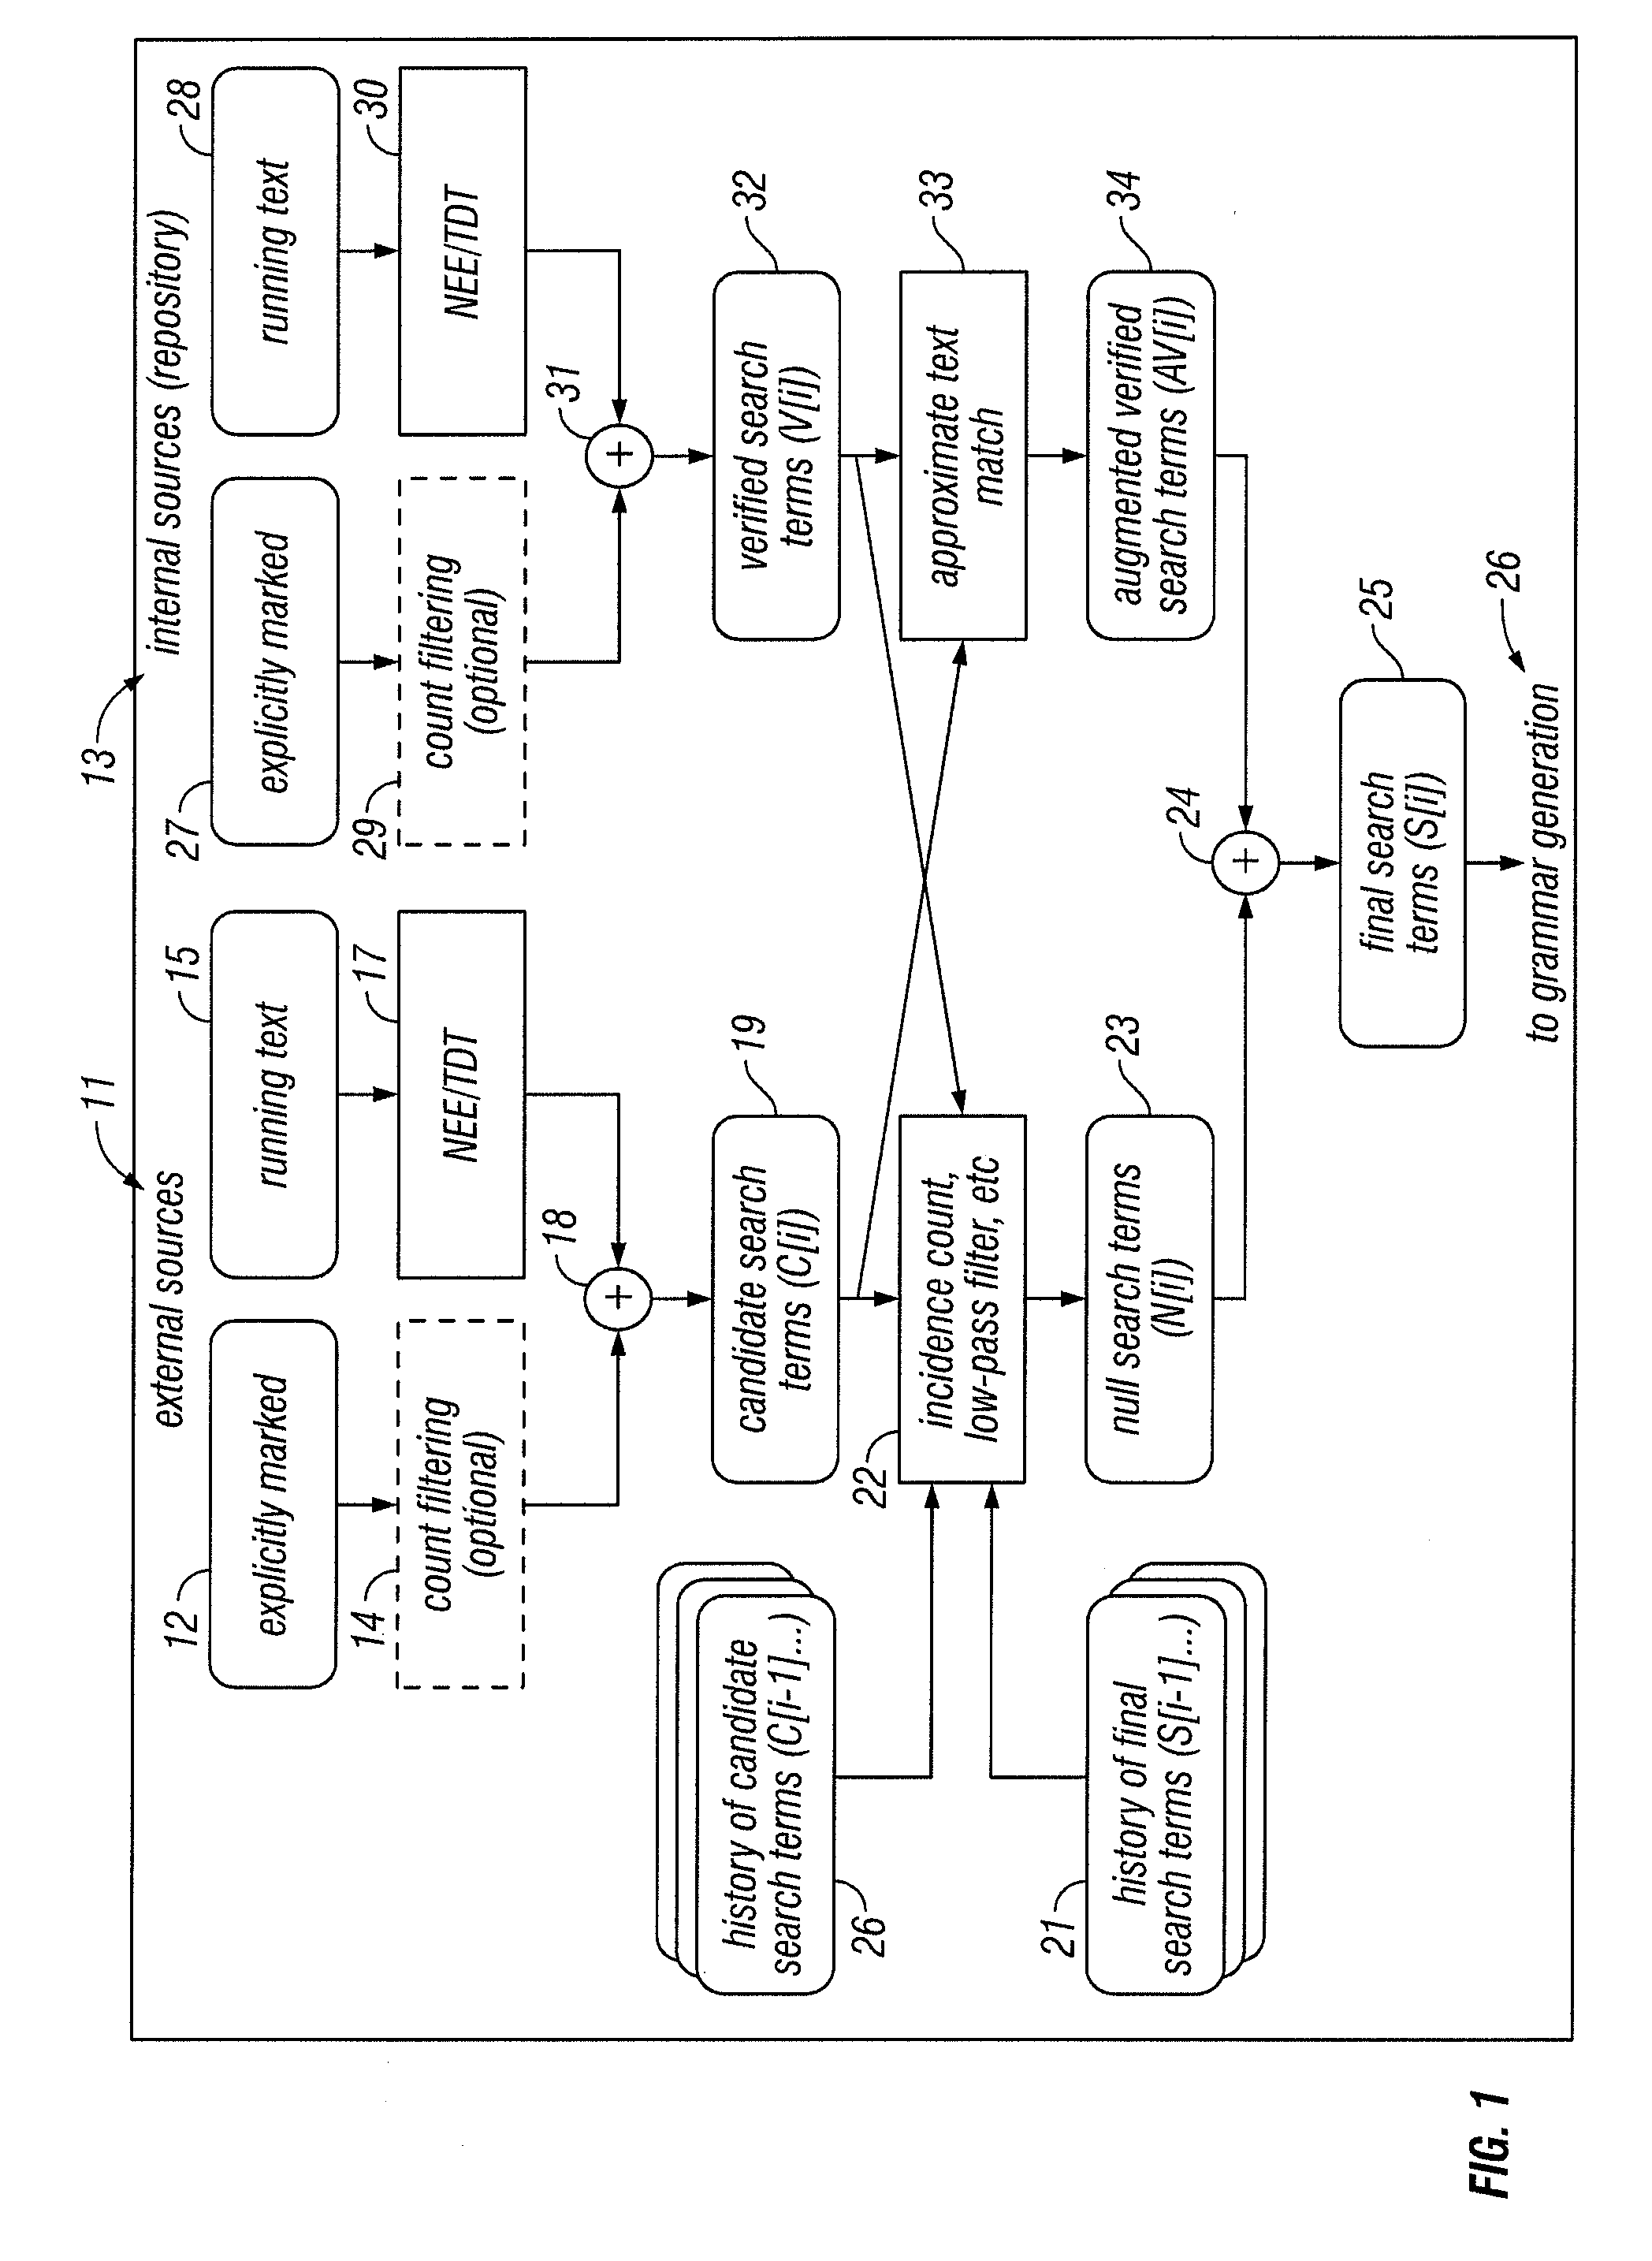 Method and Apparatus for Generation and Augmentation of Search Terms from External and Internal Sources